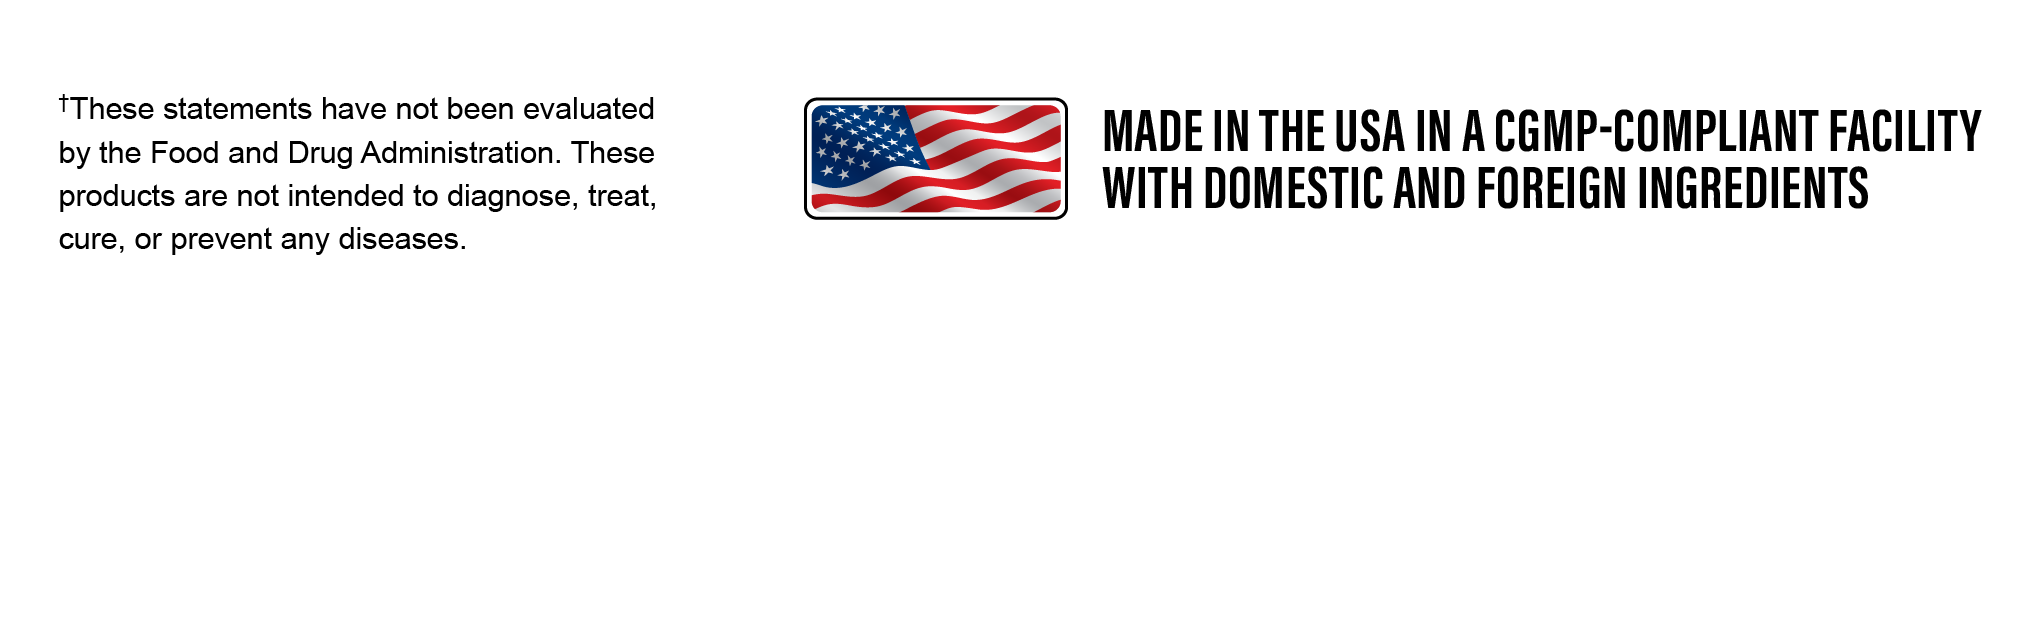 Made in the USA in a CGMP-Compliant Facility with Domestic and Foreign Ingredients